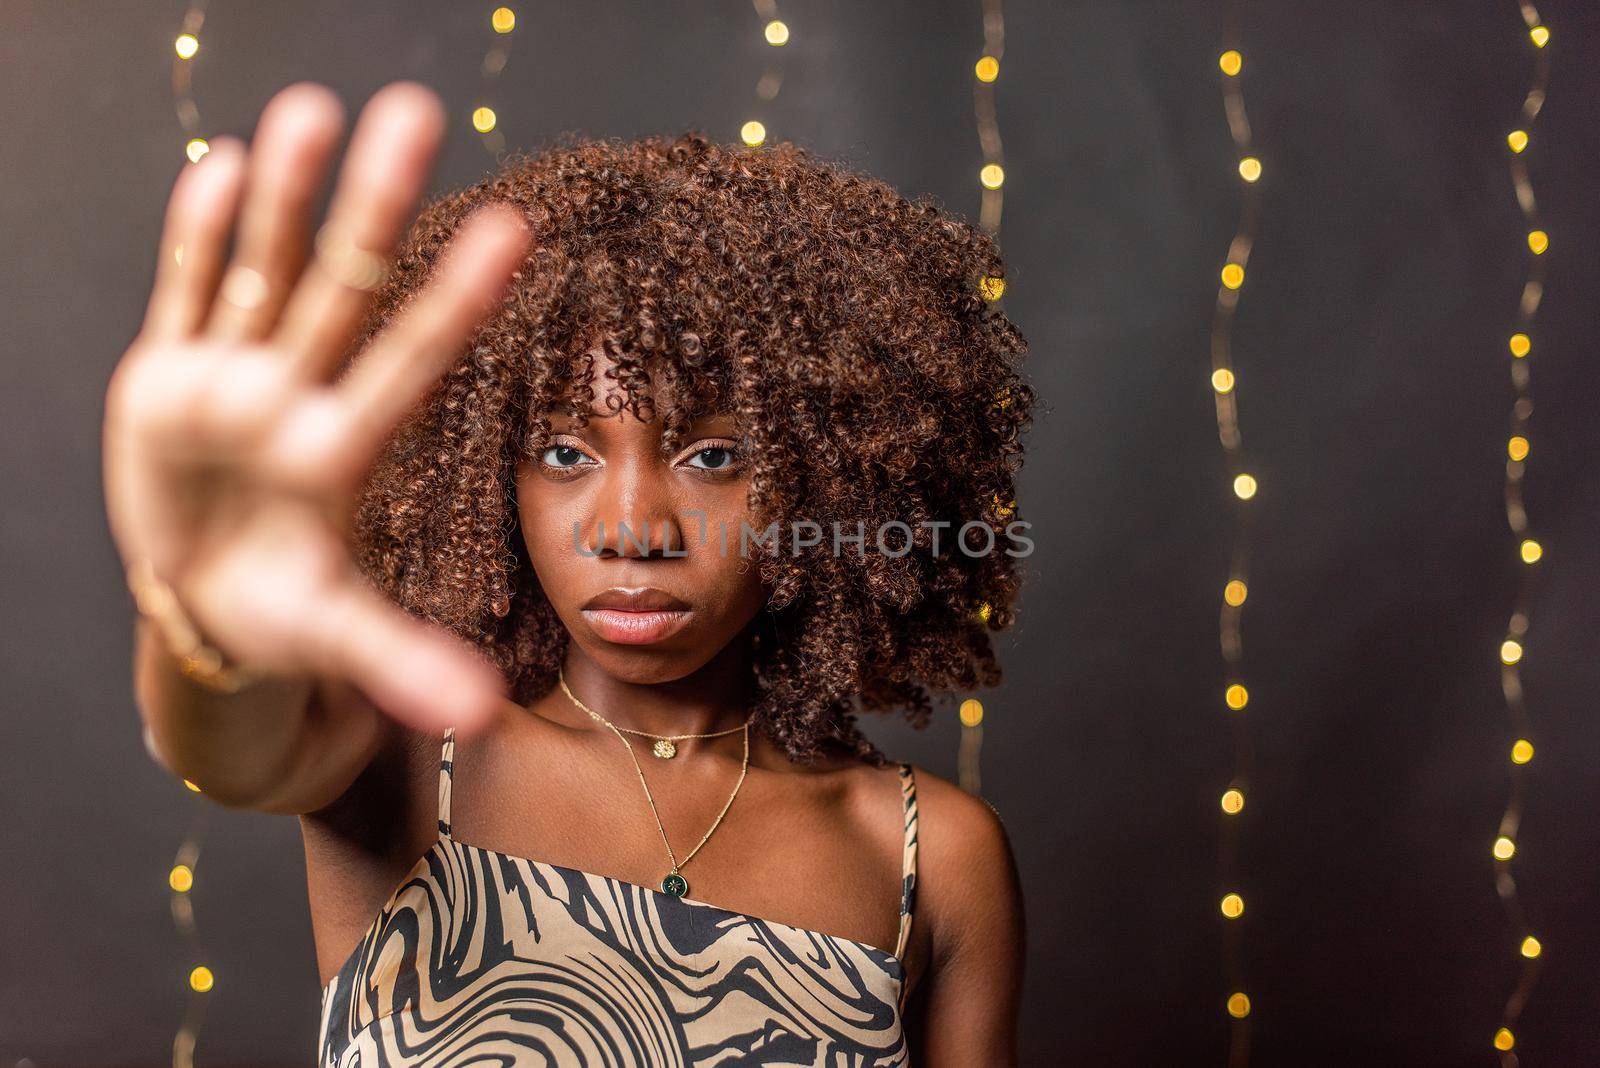 Unsmiling African American young woman with curly hair looking at camera showing palm on a blurred light background.